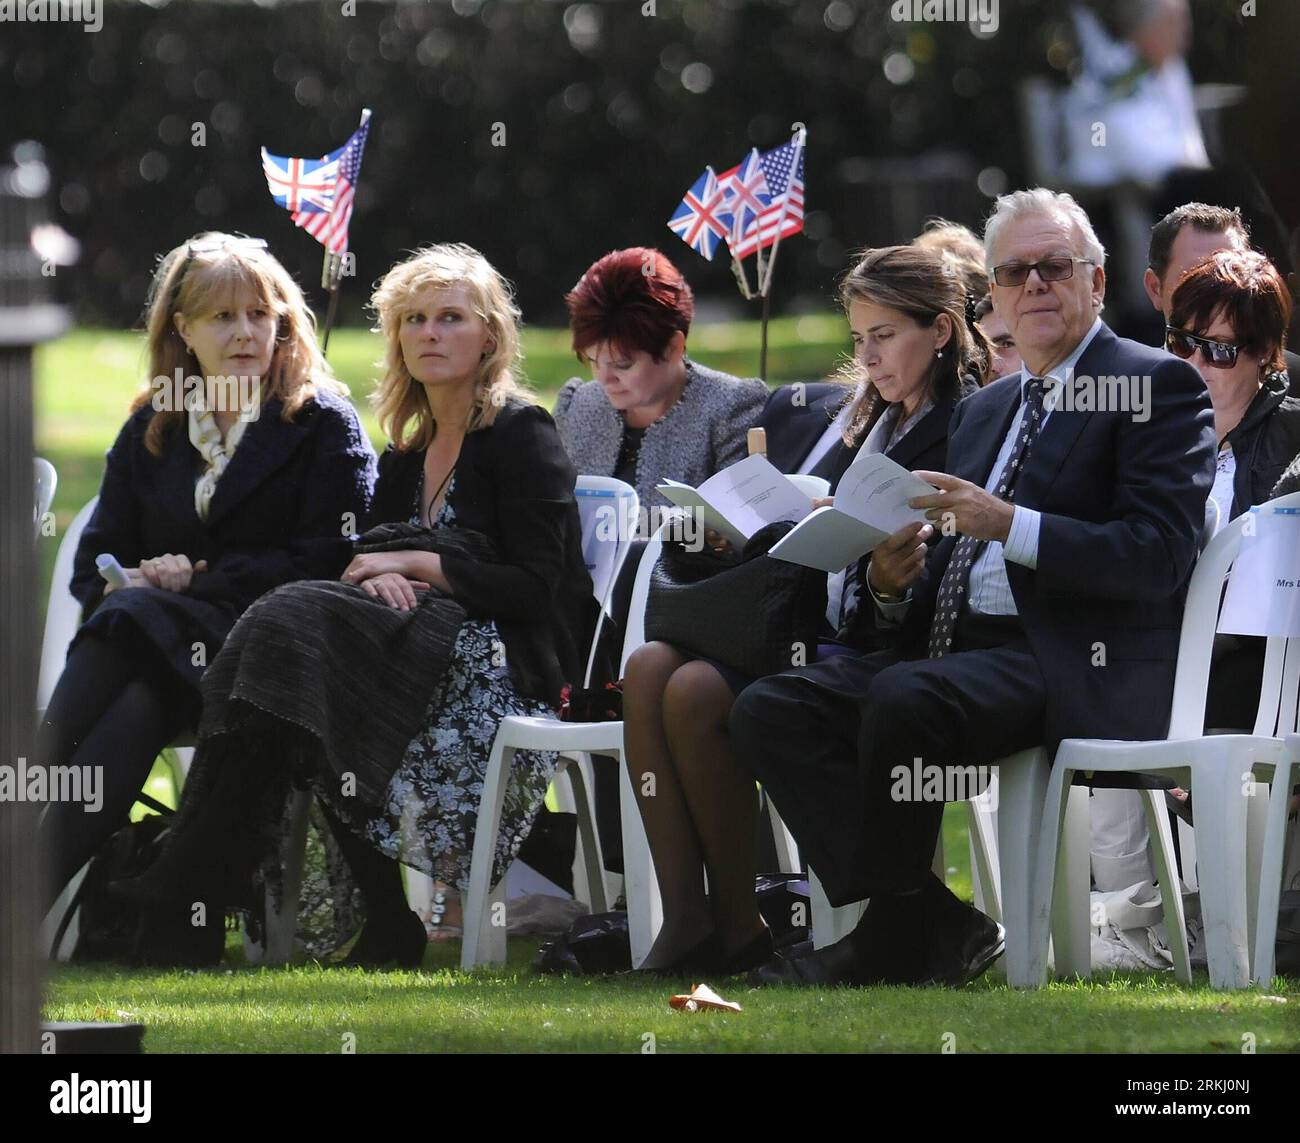 Bildnummer: 55936785  Datum: 11.09.2011  Copyright: imago/Xinhua (110912) -- LONDON, Sept. 11, 2011 (Xinhua) -- Relatives of the British victims of the 9/11 attack attend a memorial service at the Grosvenor Square in London, Britain, Sept. 11, 2011, the 10th anniversary of the 9/11 terrorist attack. Services are held across London to commemorate the victims, among whom 67 were from the UK, of the attack happening on Sept. 11, 2001 in the United States. (Xinhua/Zeng Yi) UK-LONDON-9/11-ANNIVERSARY PUBLICATIONxNOTxINxCHN Gesellschaft Gedenken 9 11 9 11 September Jahrestag x0x xtm 2011 quadrat Stock Photo